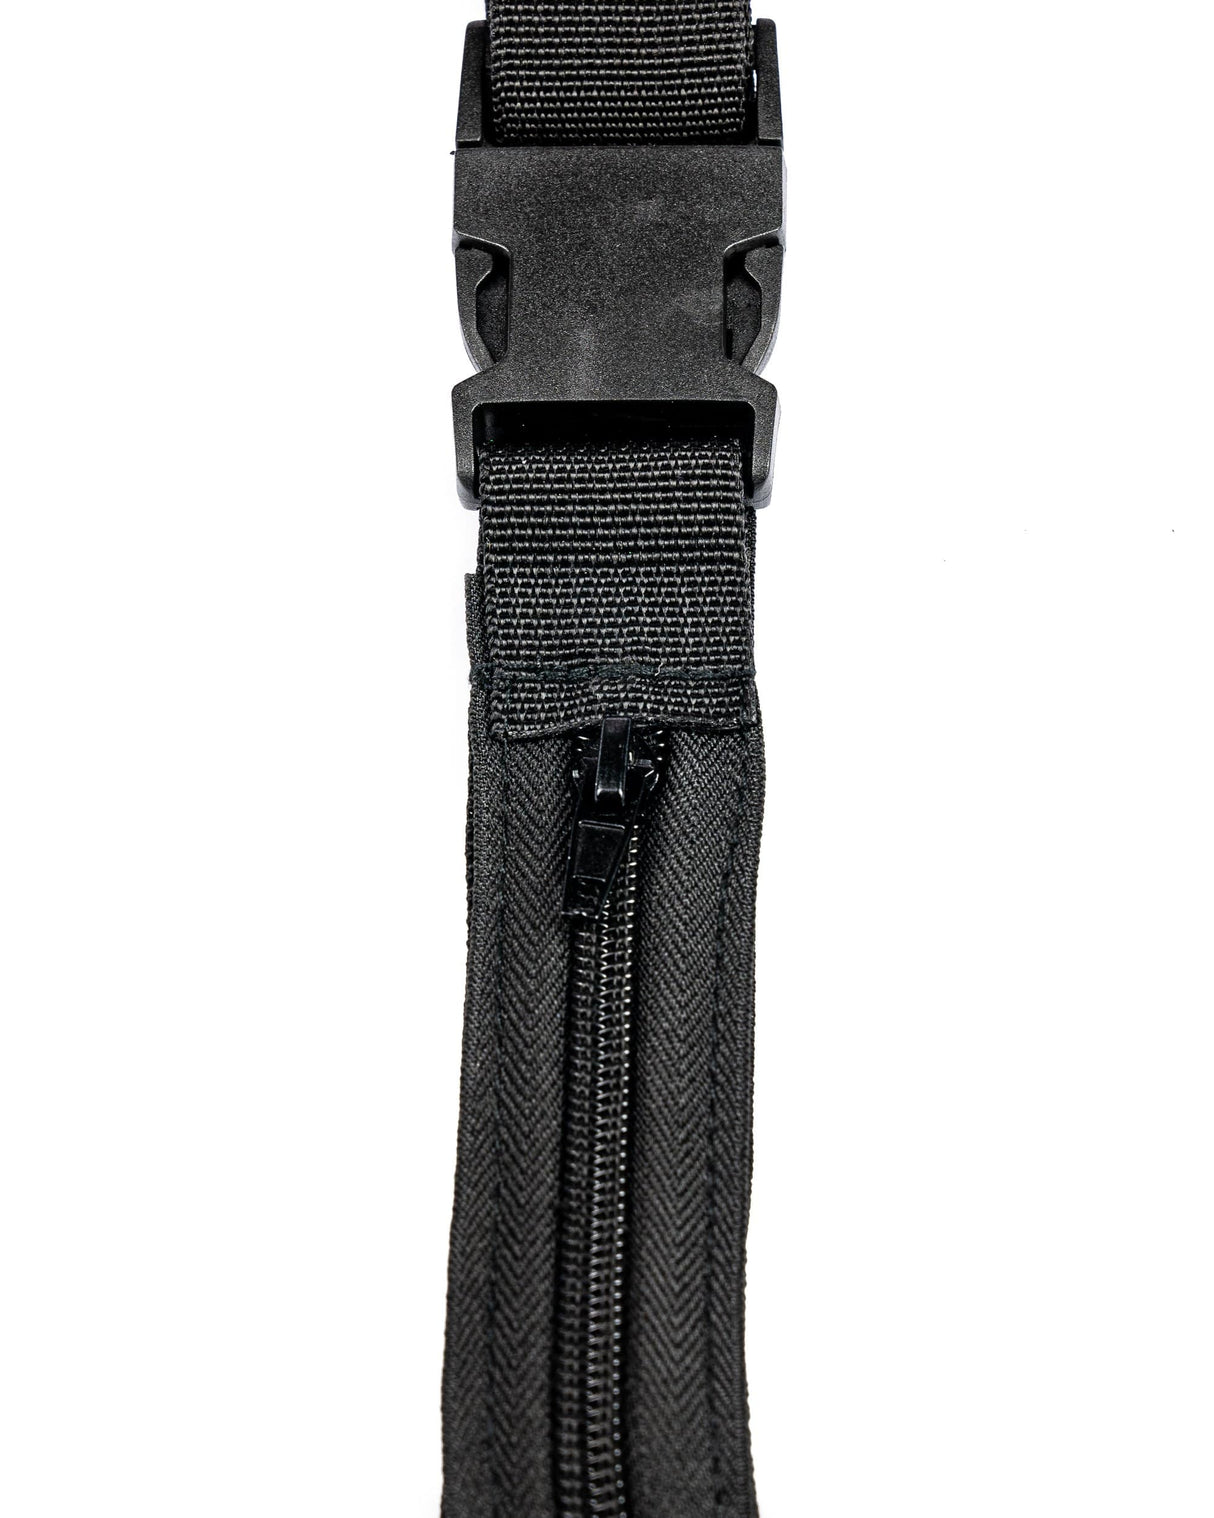 Black Festival Stash Belt by Valiant Distribution, front view with closable zipper for secure storage